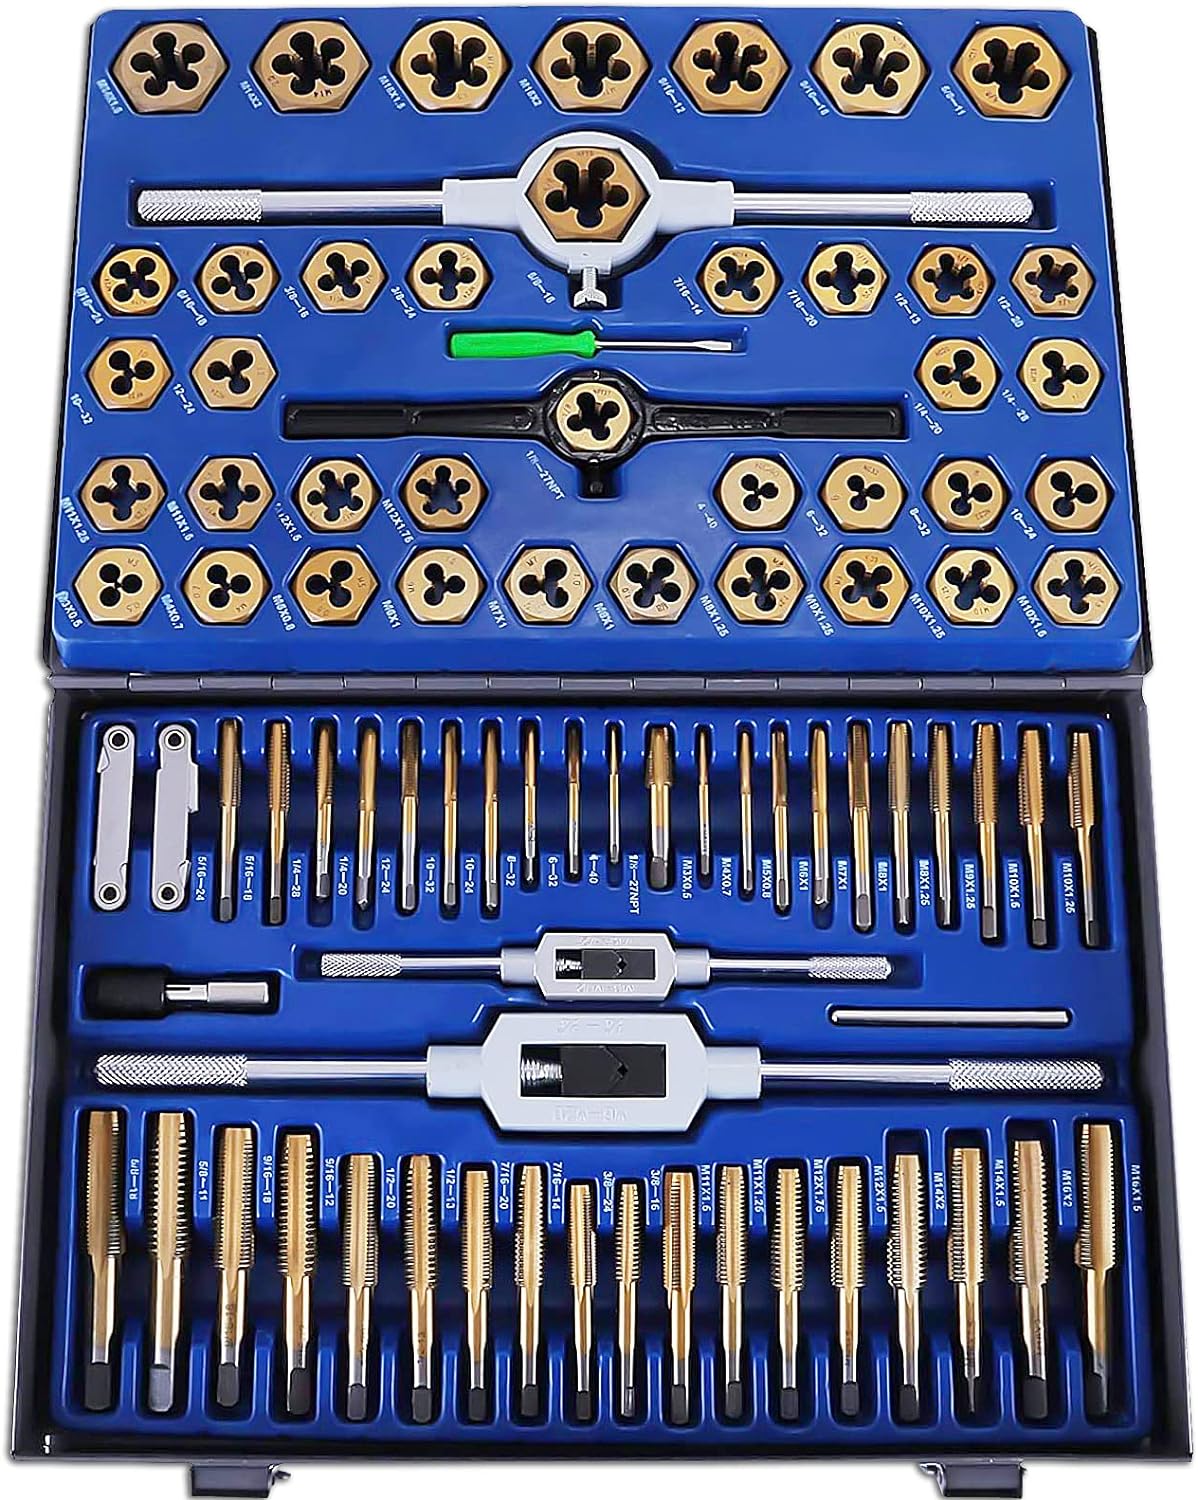 Ruian Yisui fuzhuang shanghang Happybuy 86PC Tap and Die set, Tap and Die Set Metric and Standard, Large Tap and Die Set, SAE and Metric Tap and Die Set With